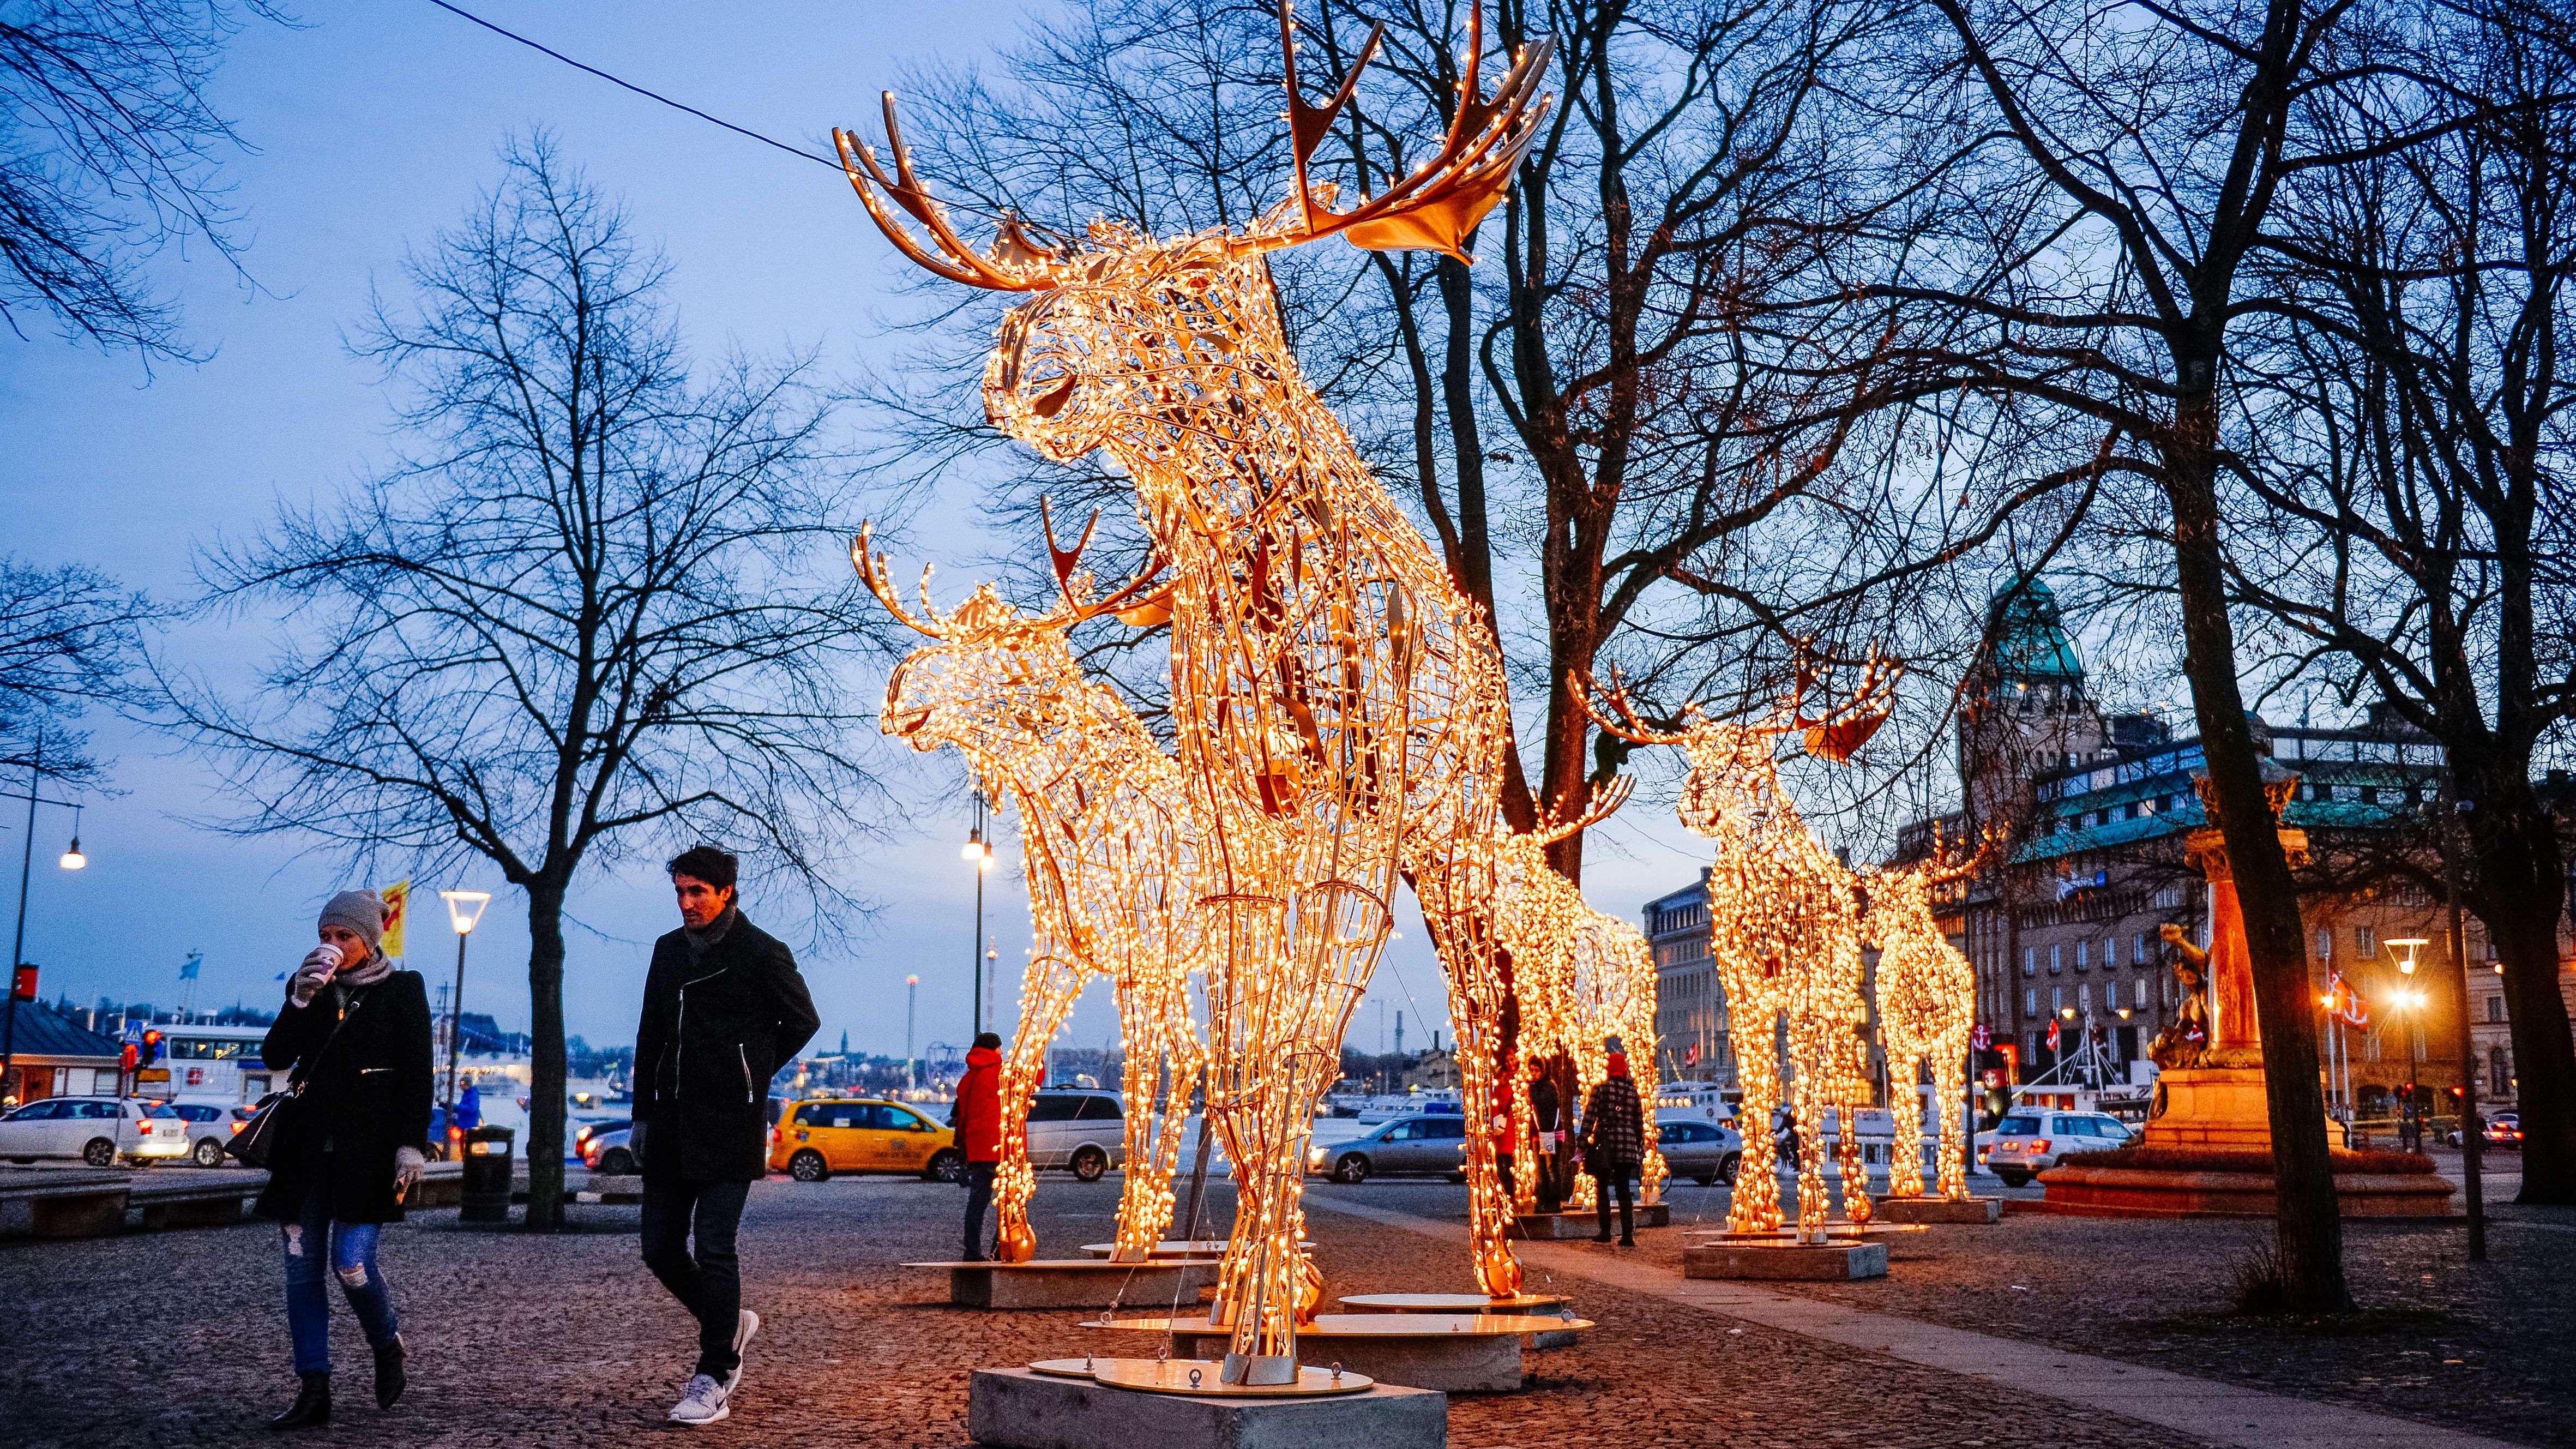 20+ Most Beautiful Christmas Decorations Around the World in Photos